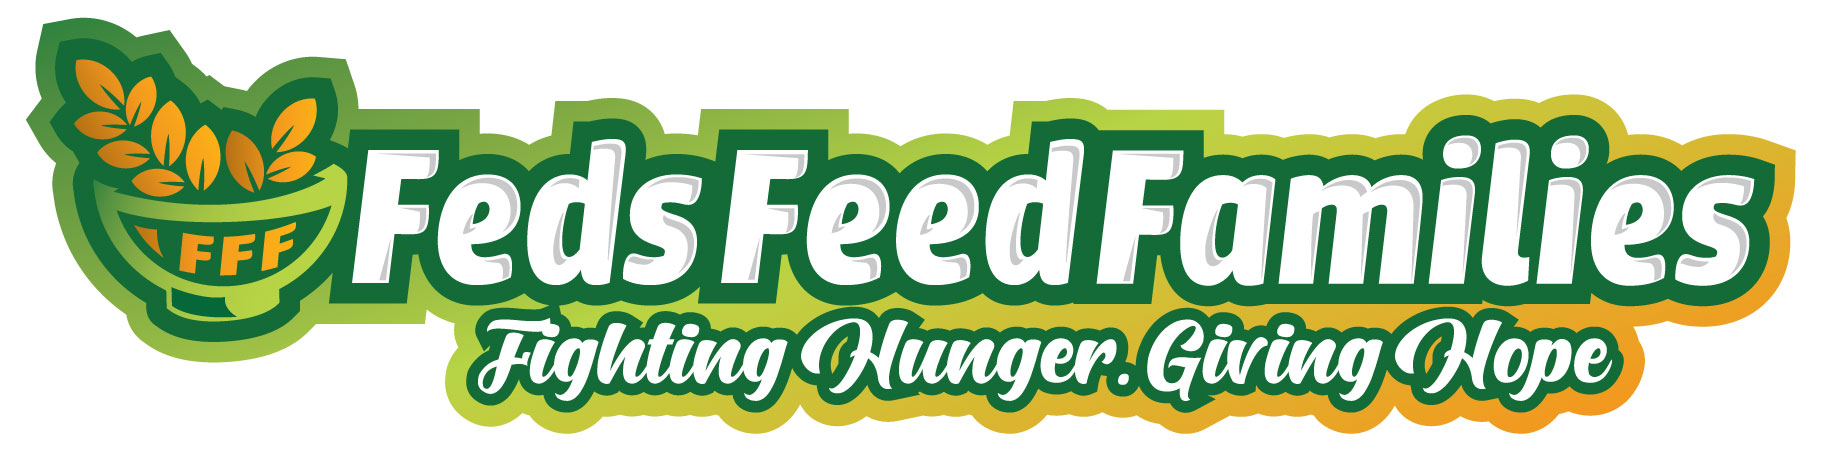 Feds Feed Families - SoSA's Gleaning Network